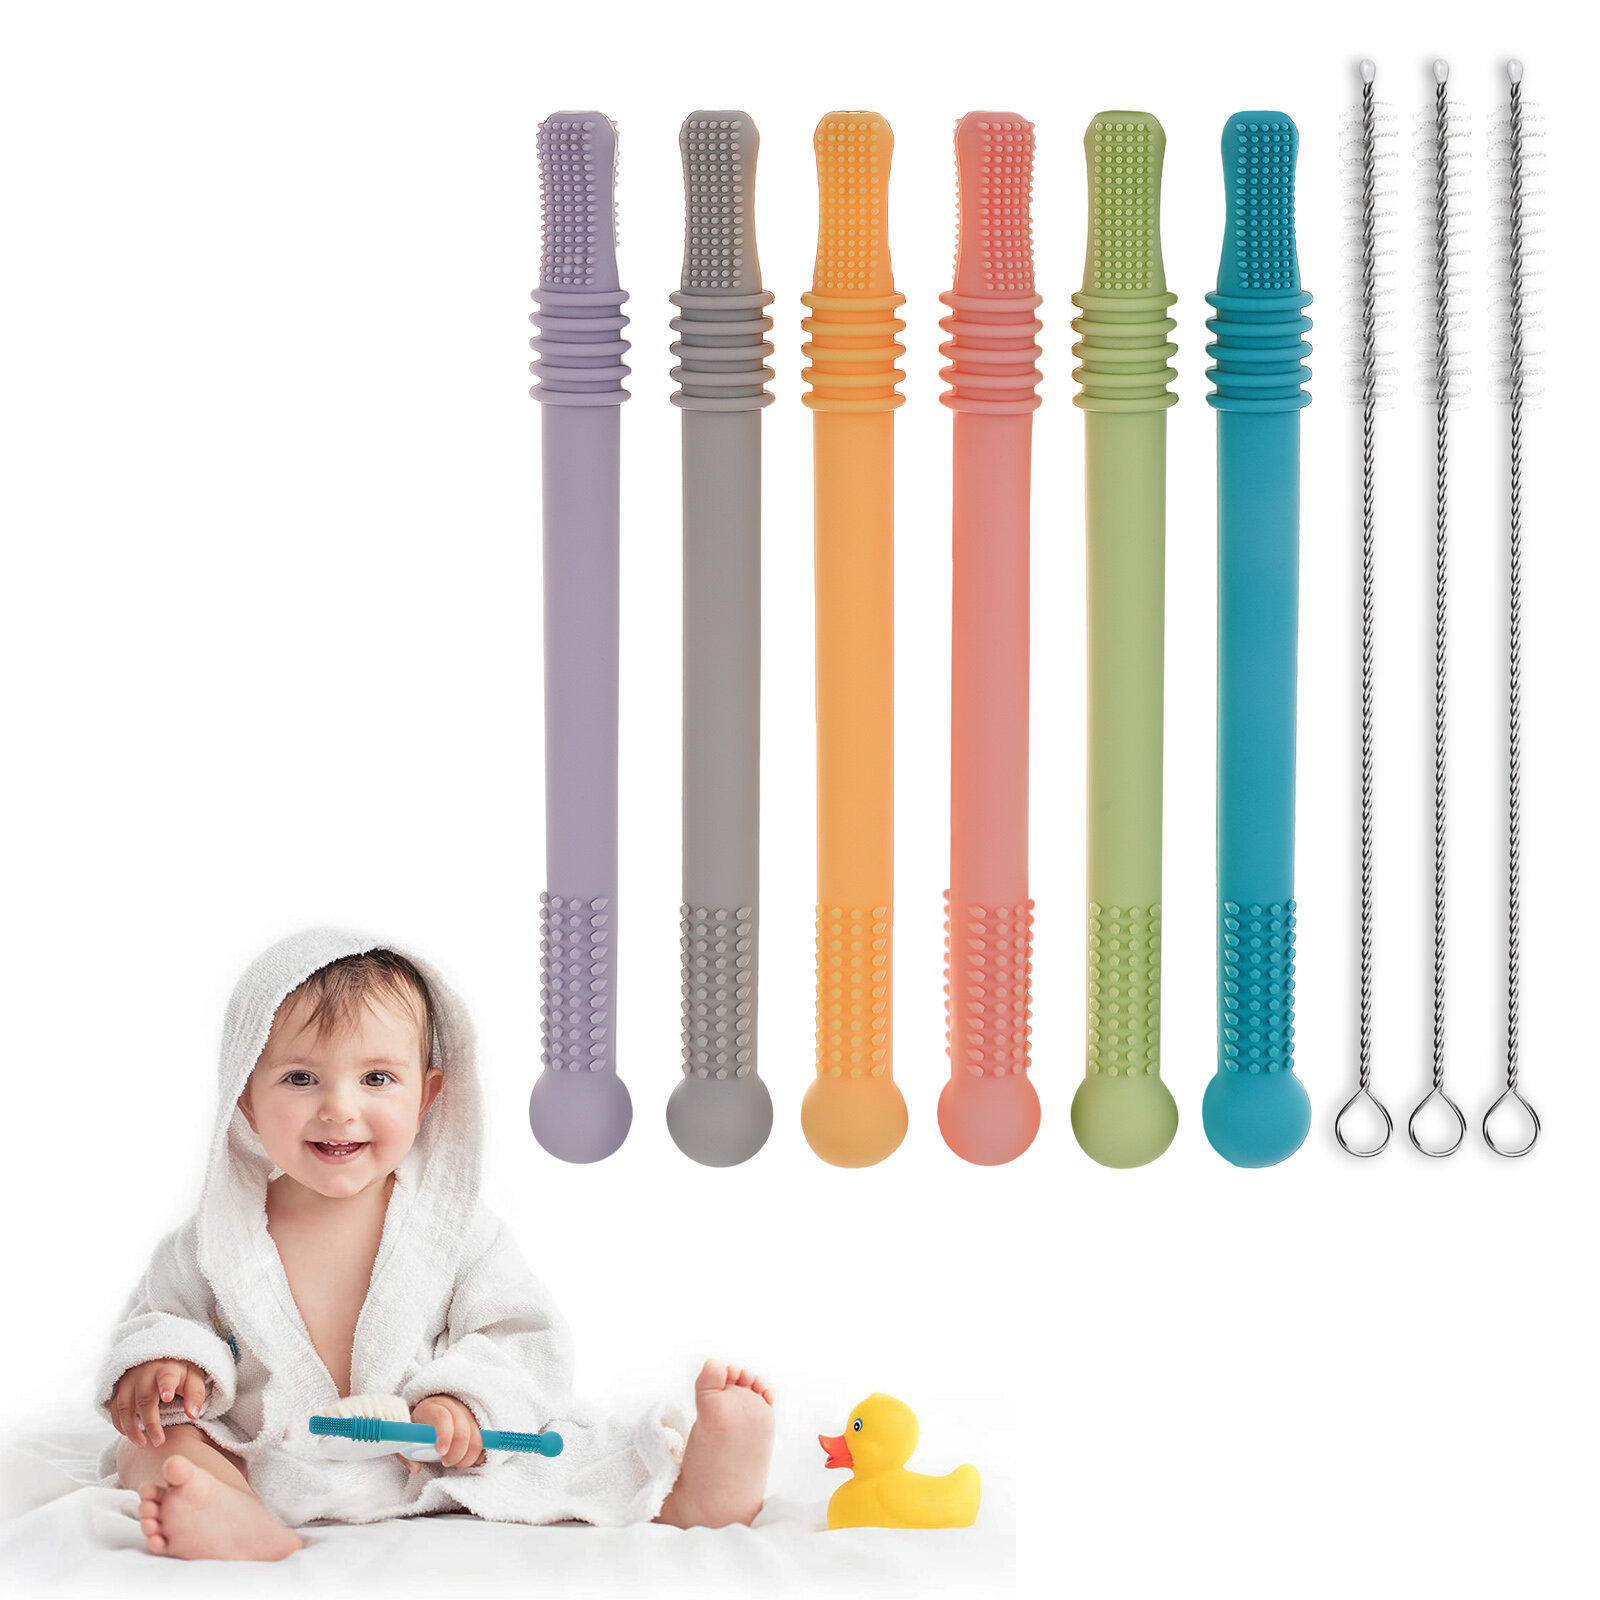 

Hollow Teething Tubes for Babies(6 Pack), Baby Teether Tubes, Soft Silicone Teething Straws for Infants, BPA Free & Free